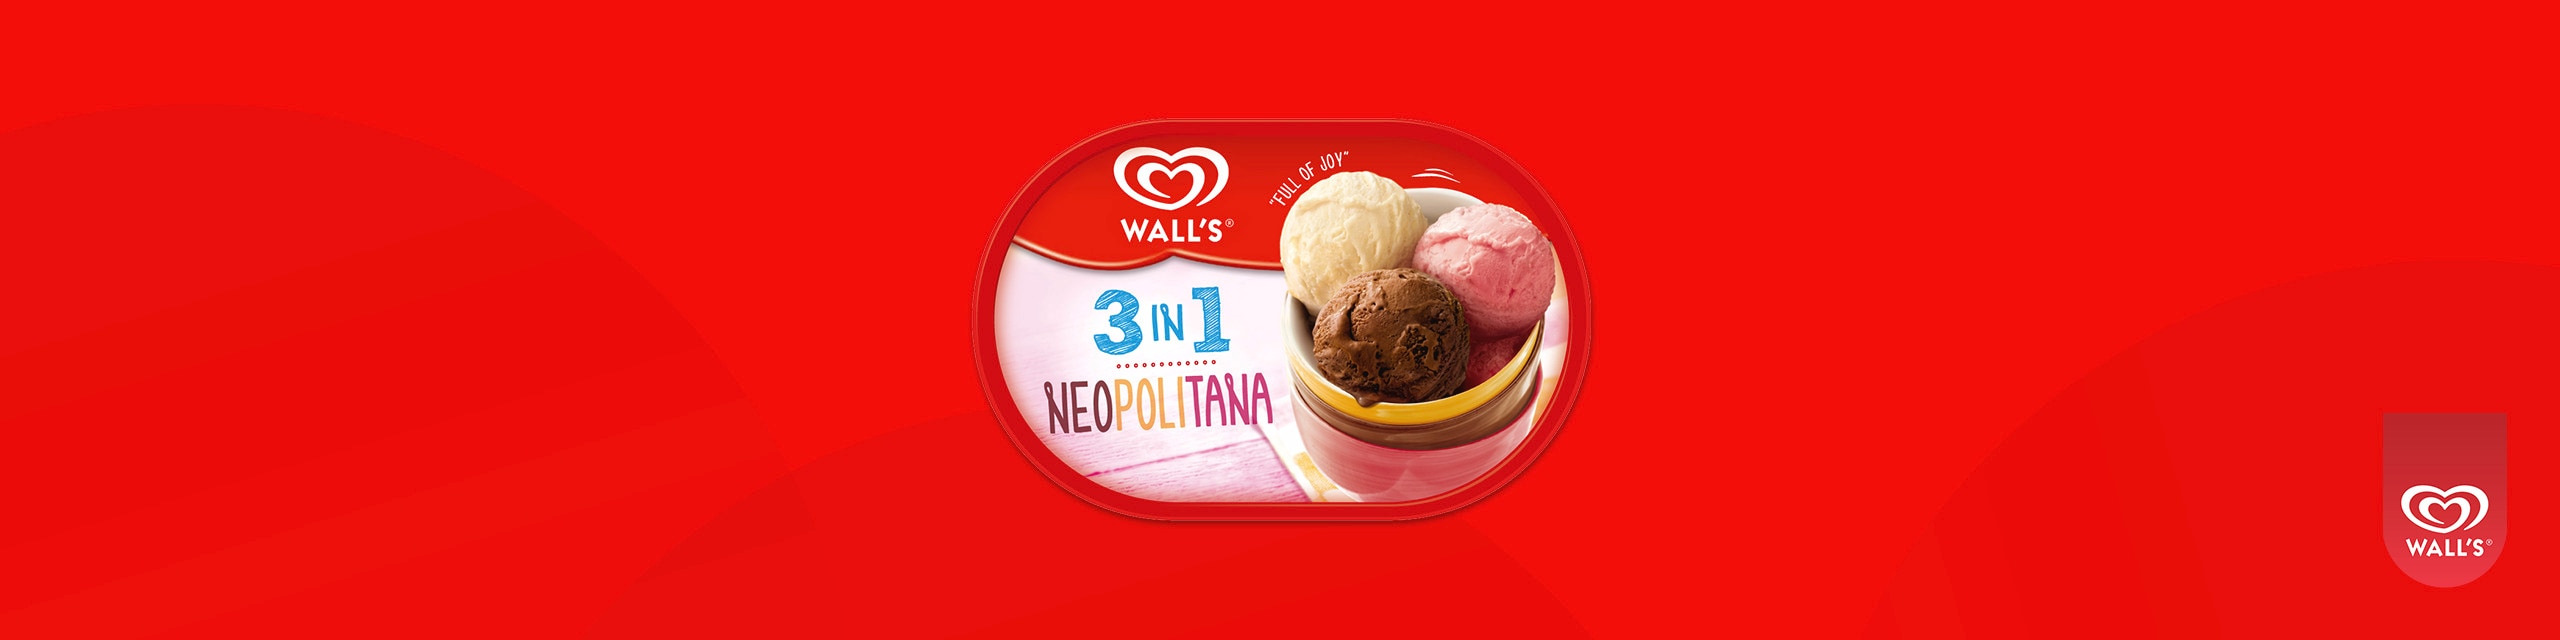 Neopolitana 3 in 1 icecream tub on a red background